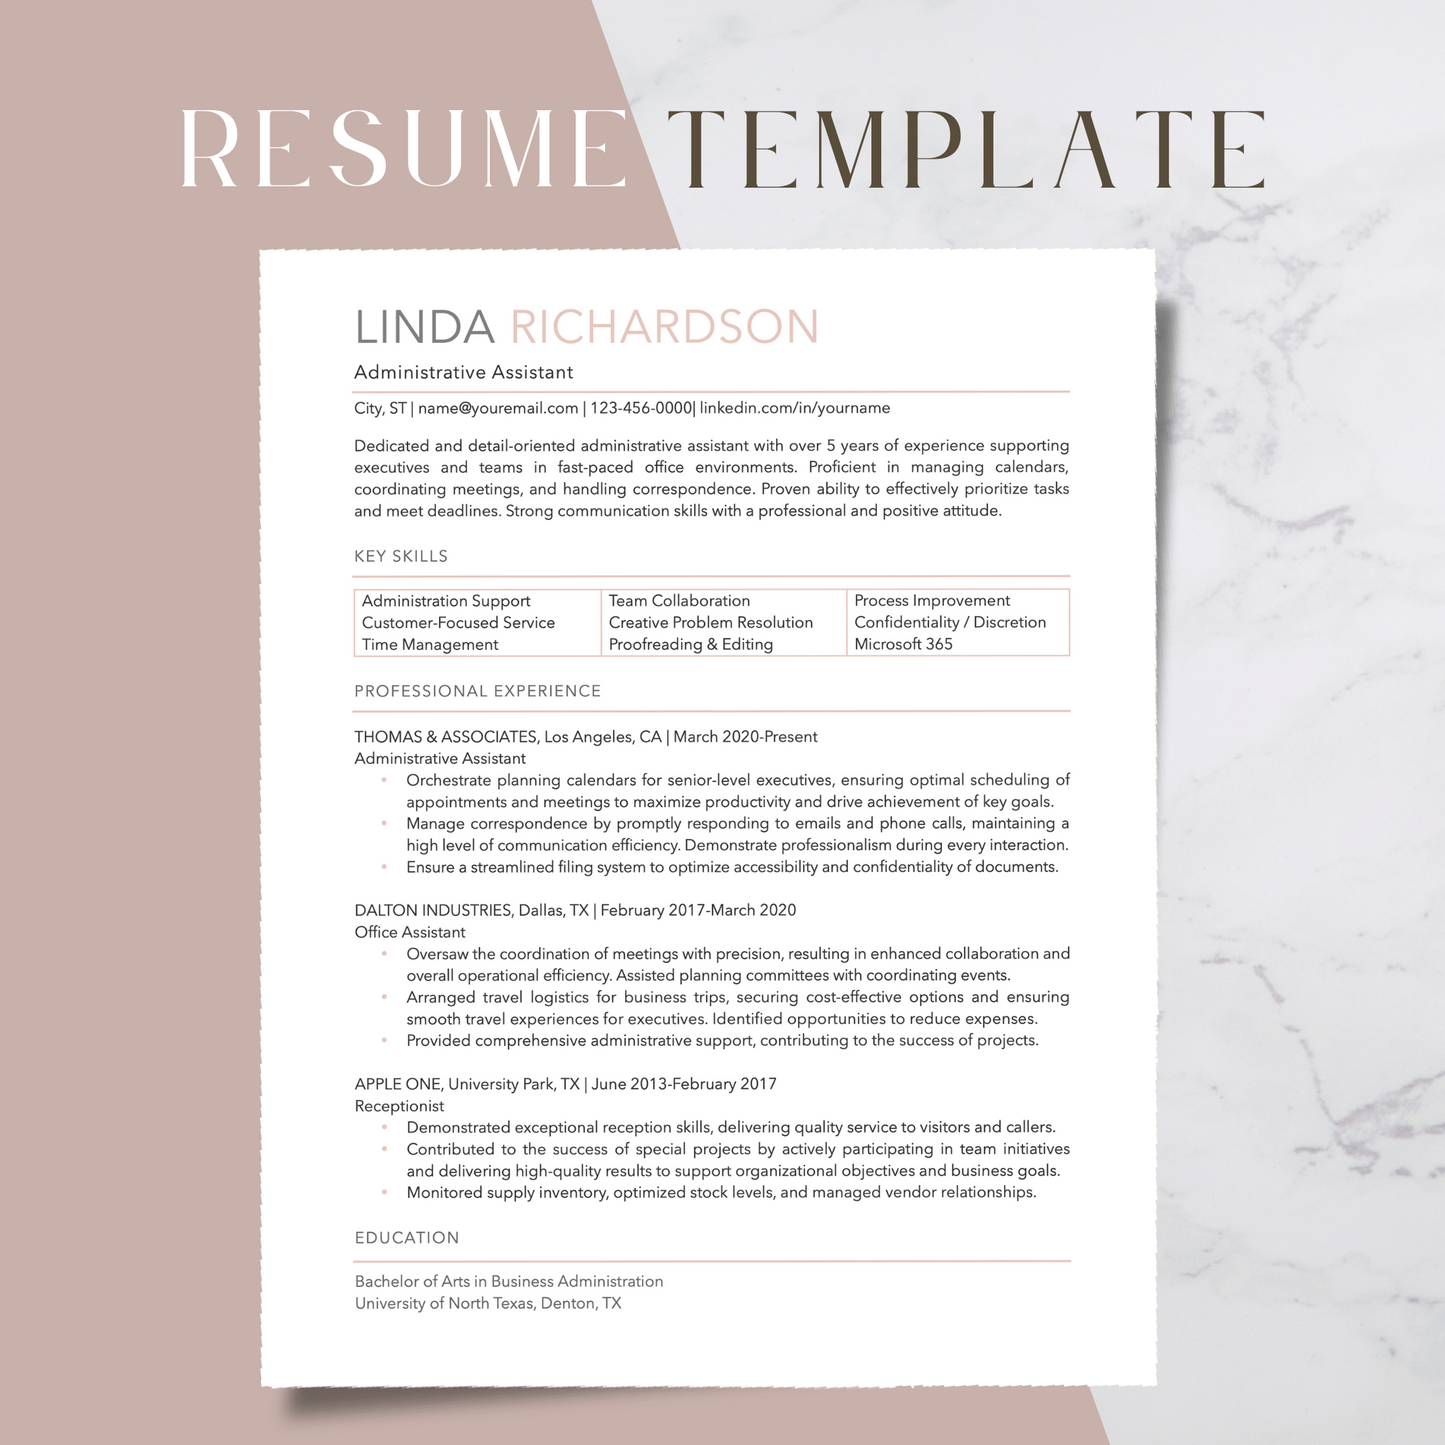 ATS-Friendly Resume Template for Google Docs, Word, Pages - Digital Download (Style 106)